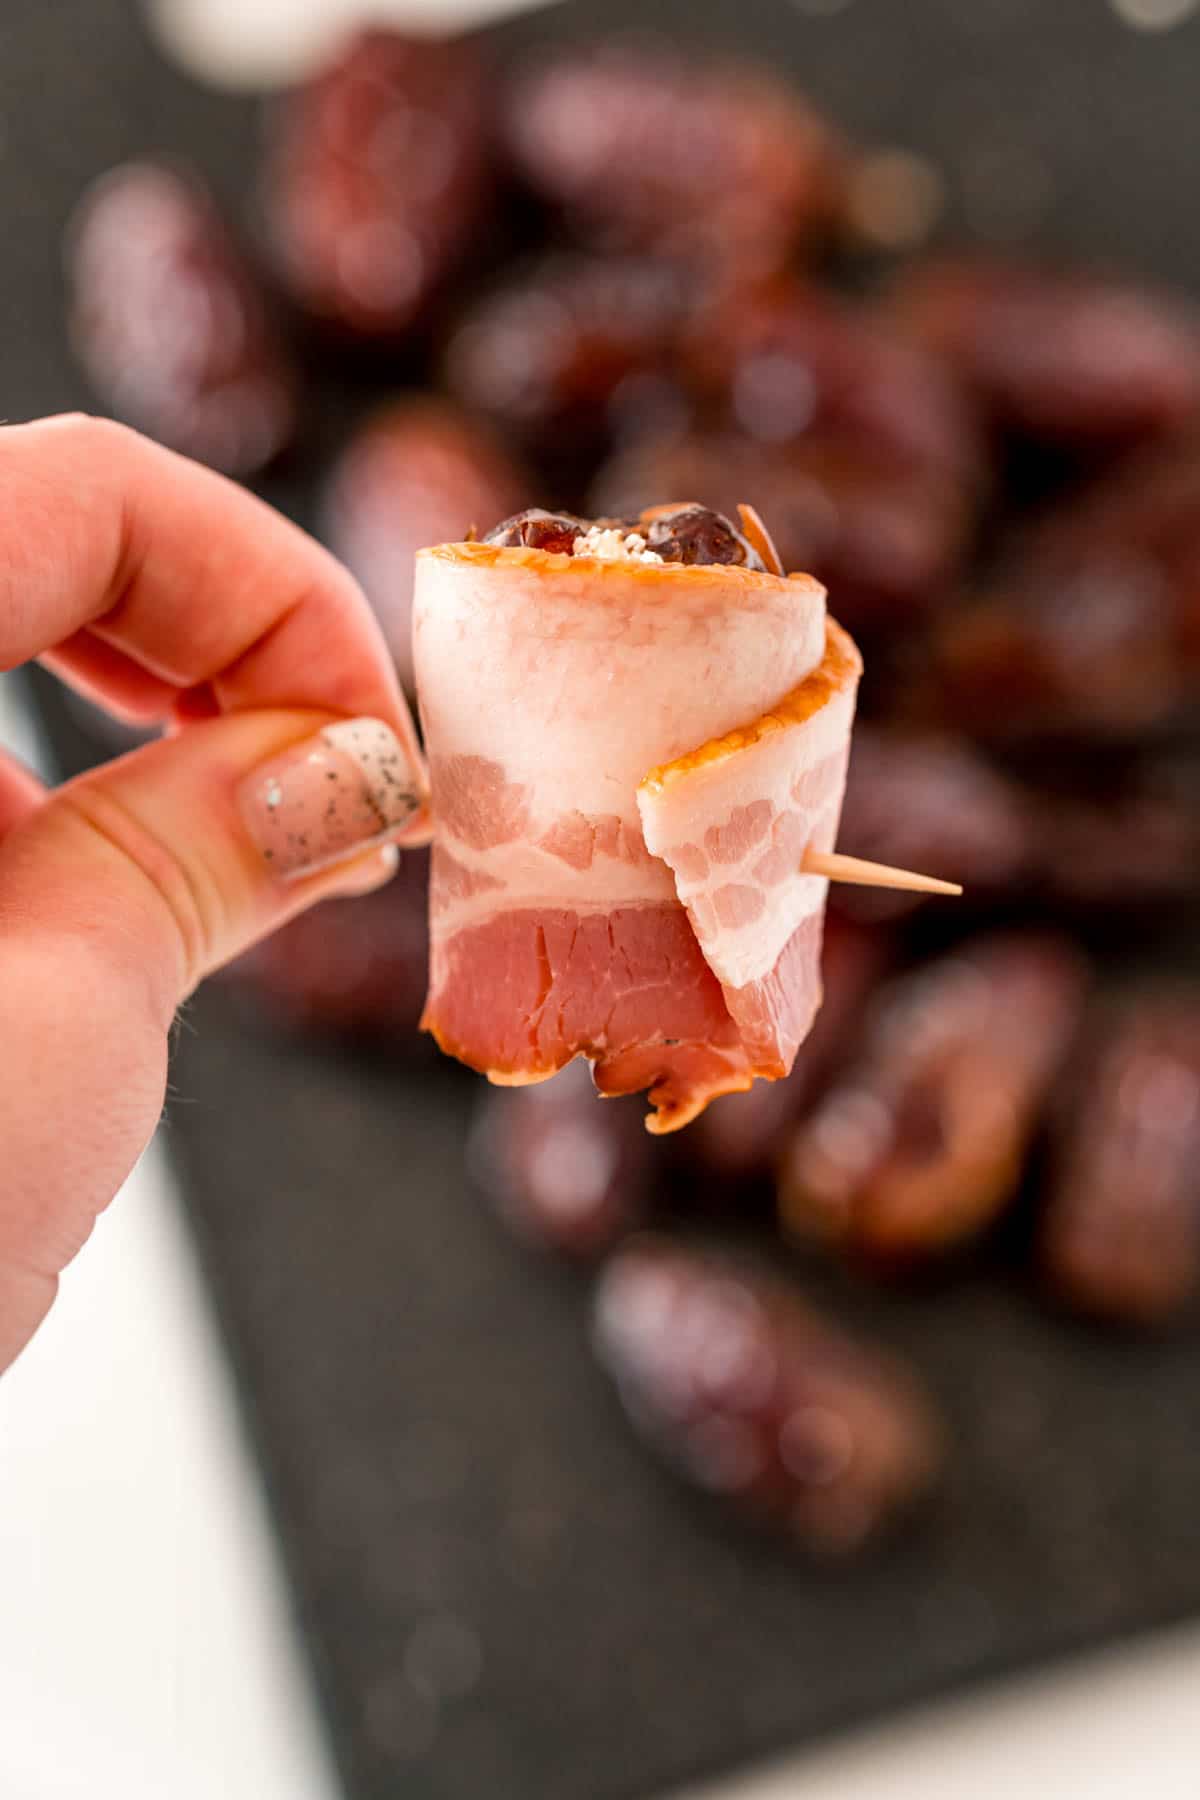 Bacon wrapped around a stuffed date